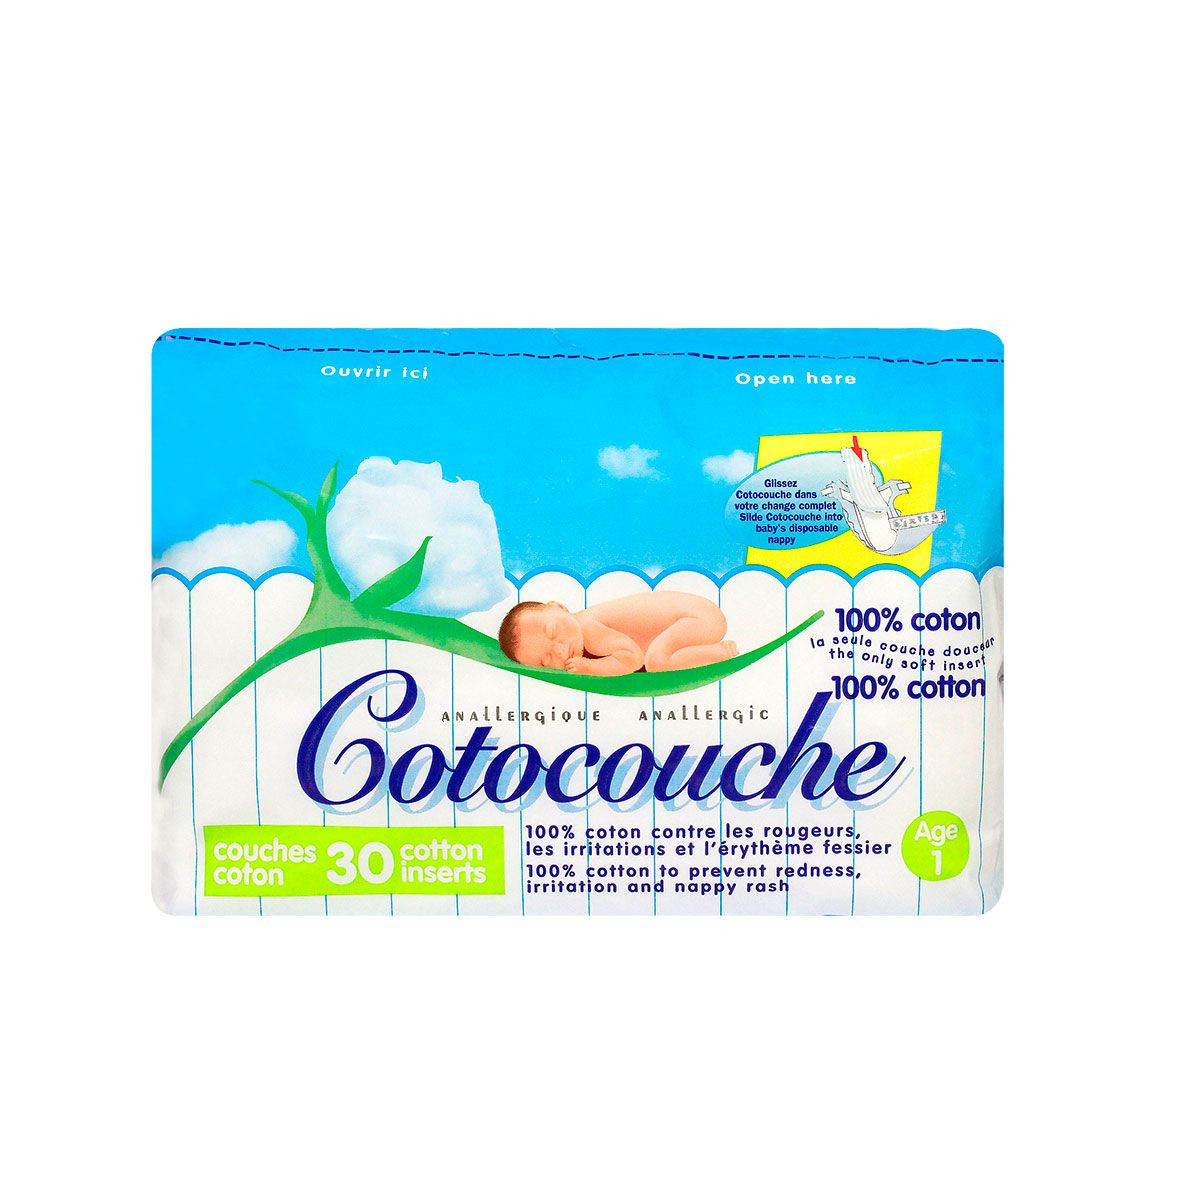 https://www.pharma360.fr/17728/30-couches-coton-cotocouche-anallergique-1er-age.jpg